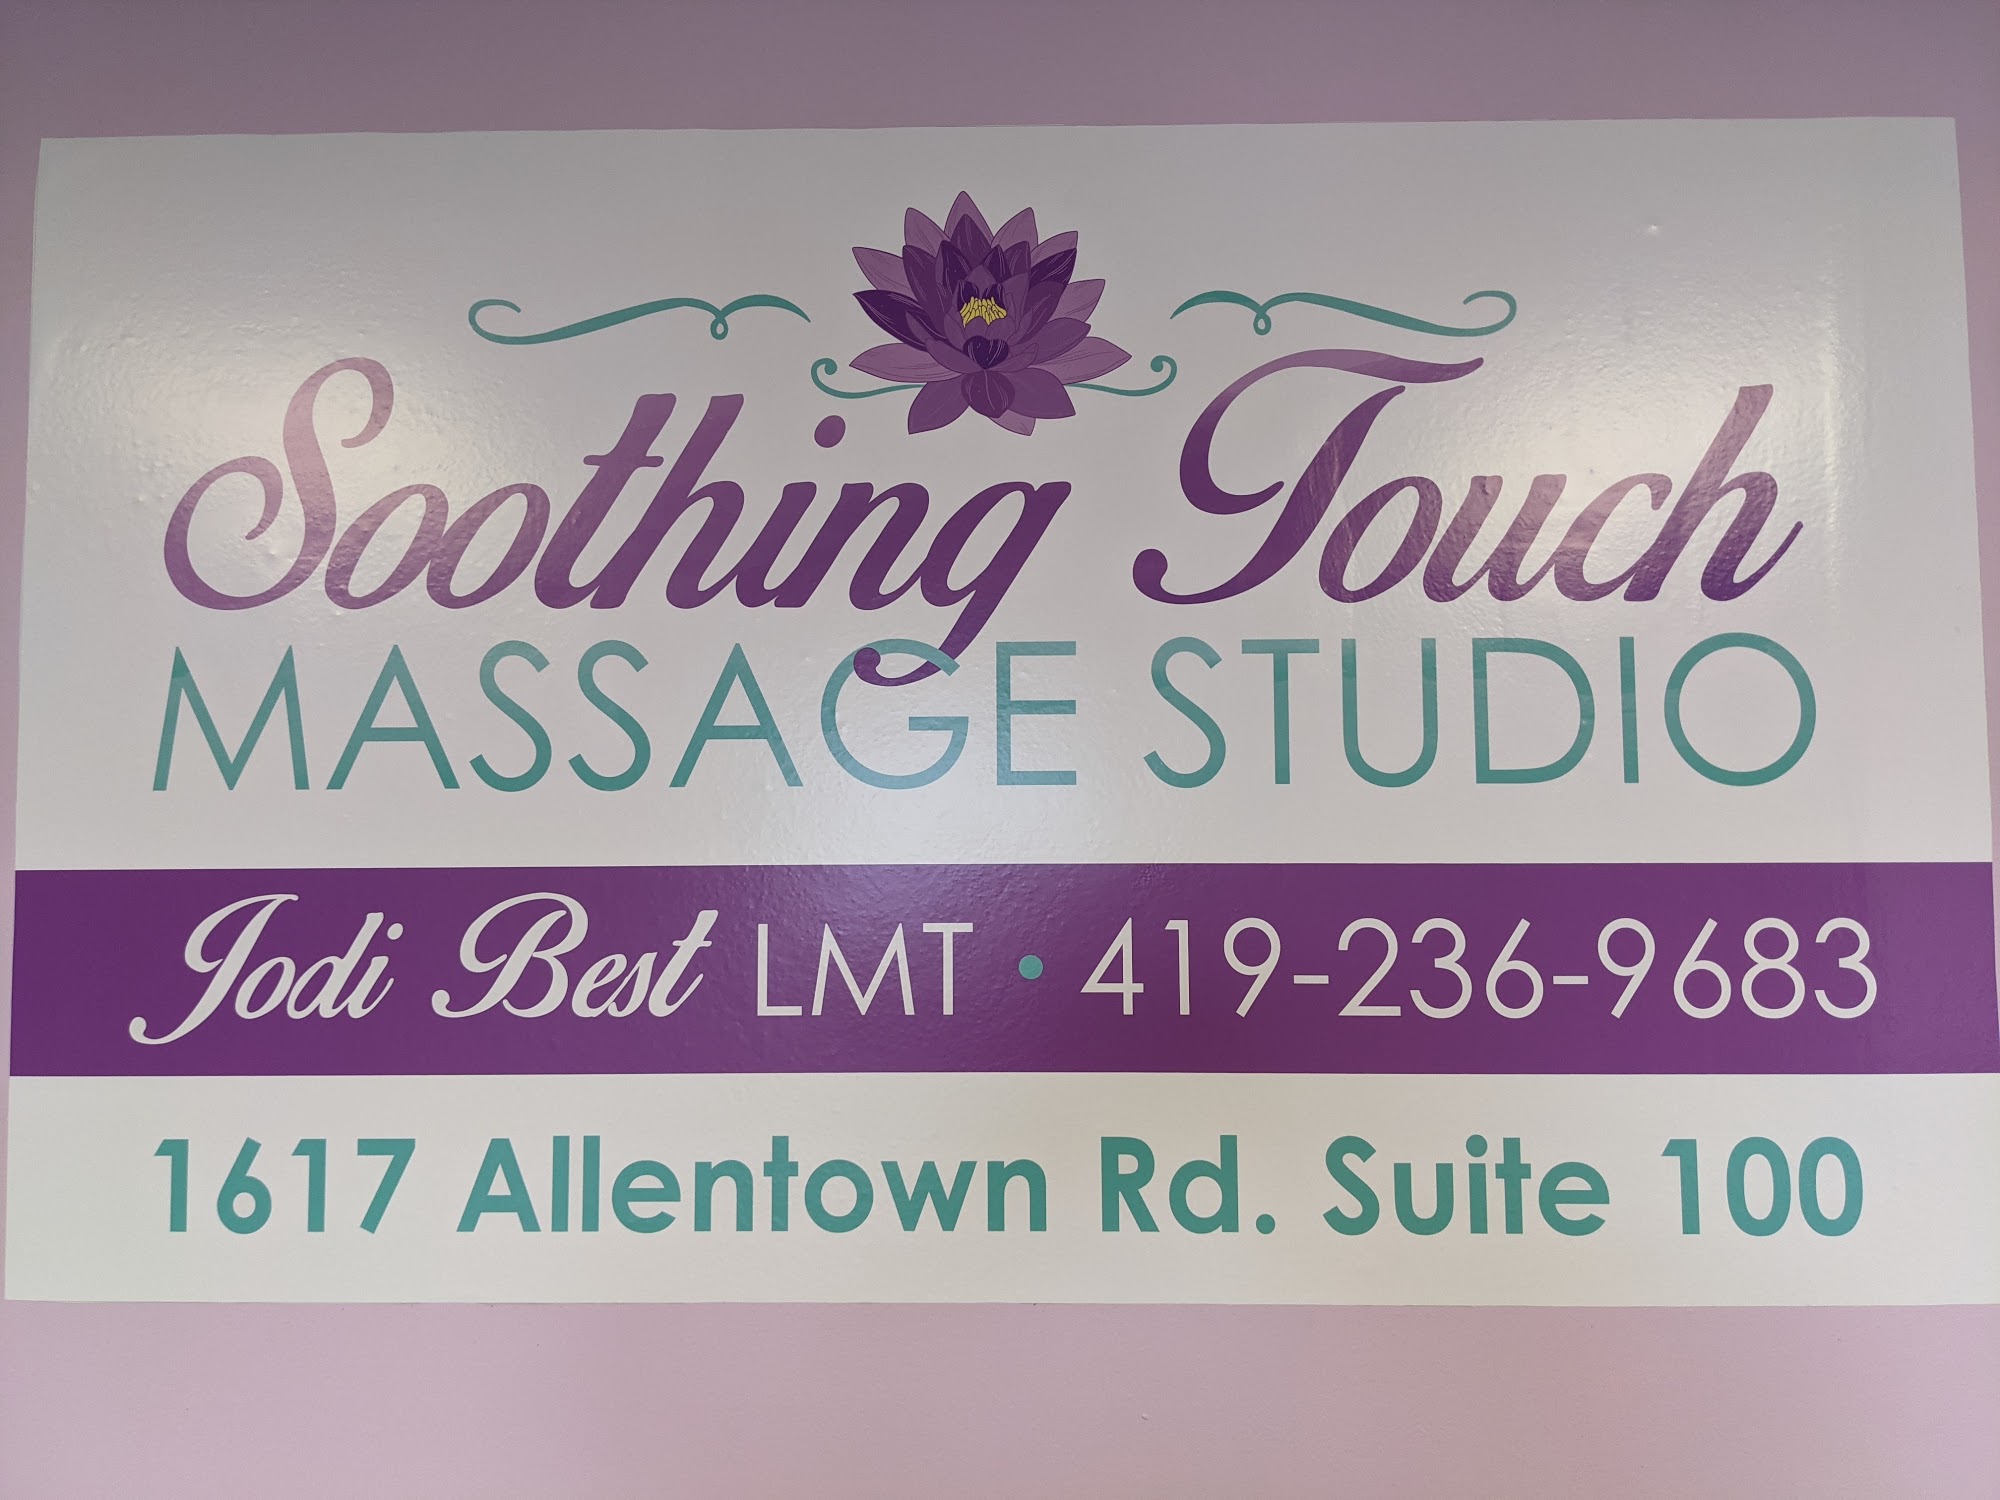 Soothing Touch Massage Studio